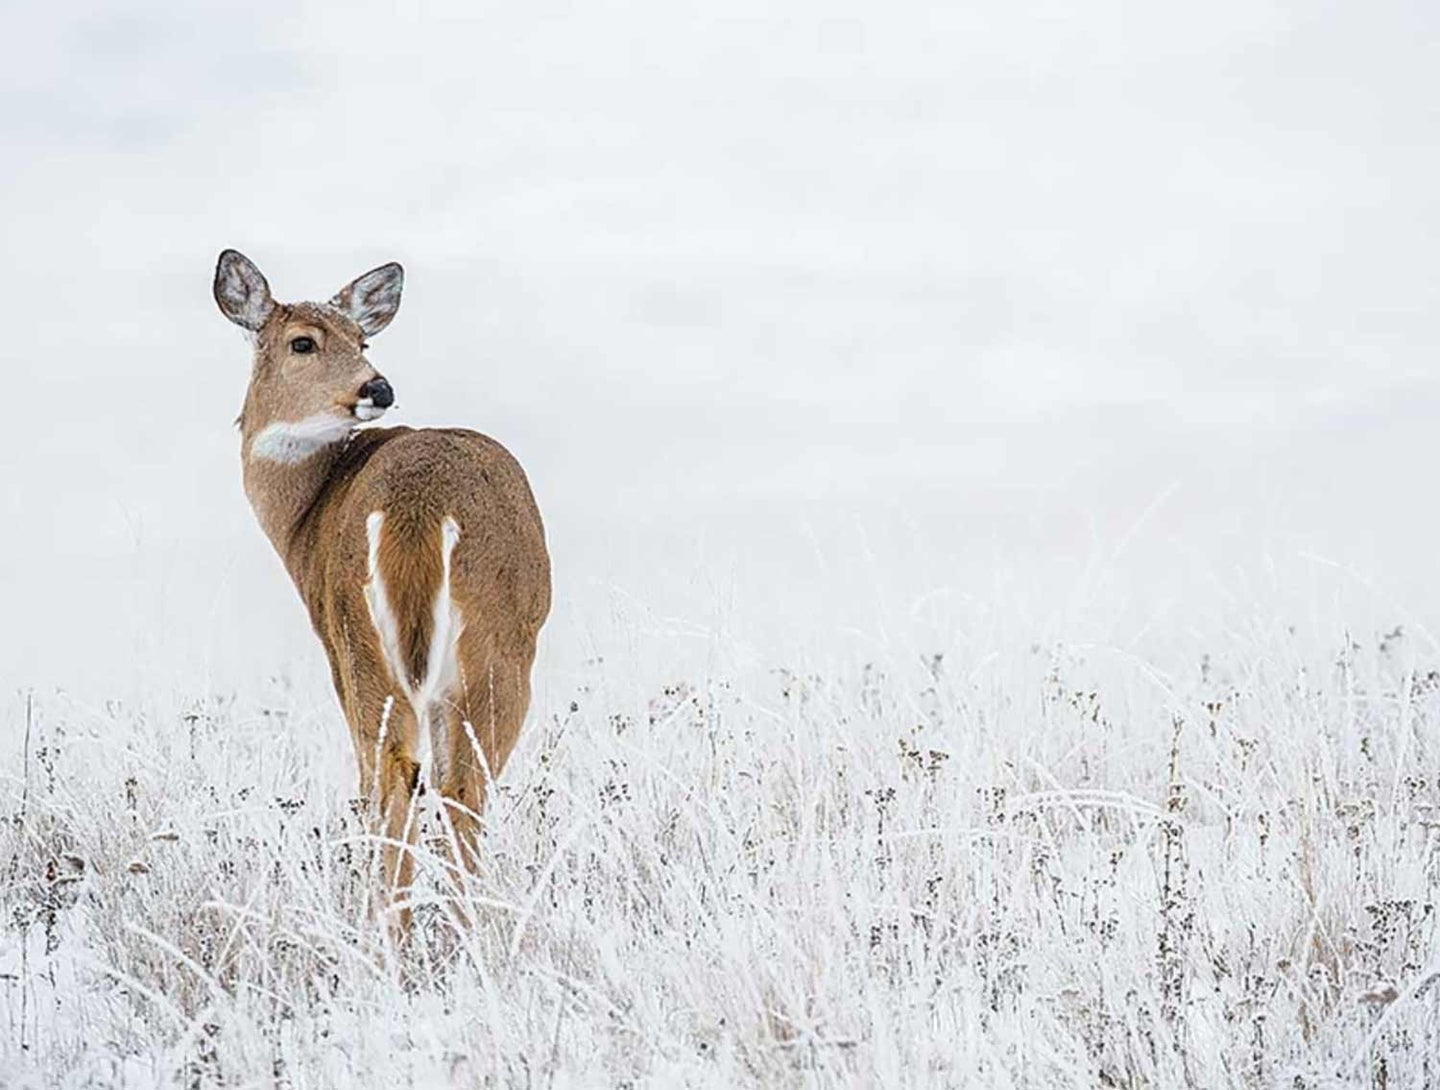 A whitetail doe walks through a snow-covered field of grass.